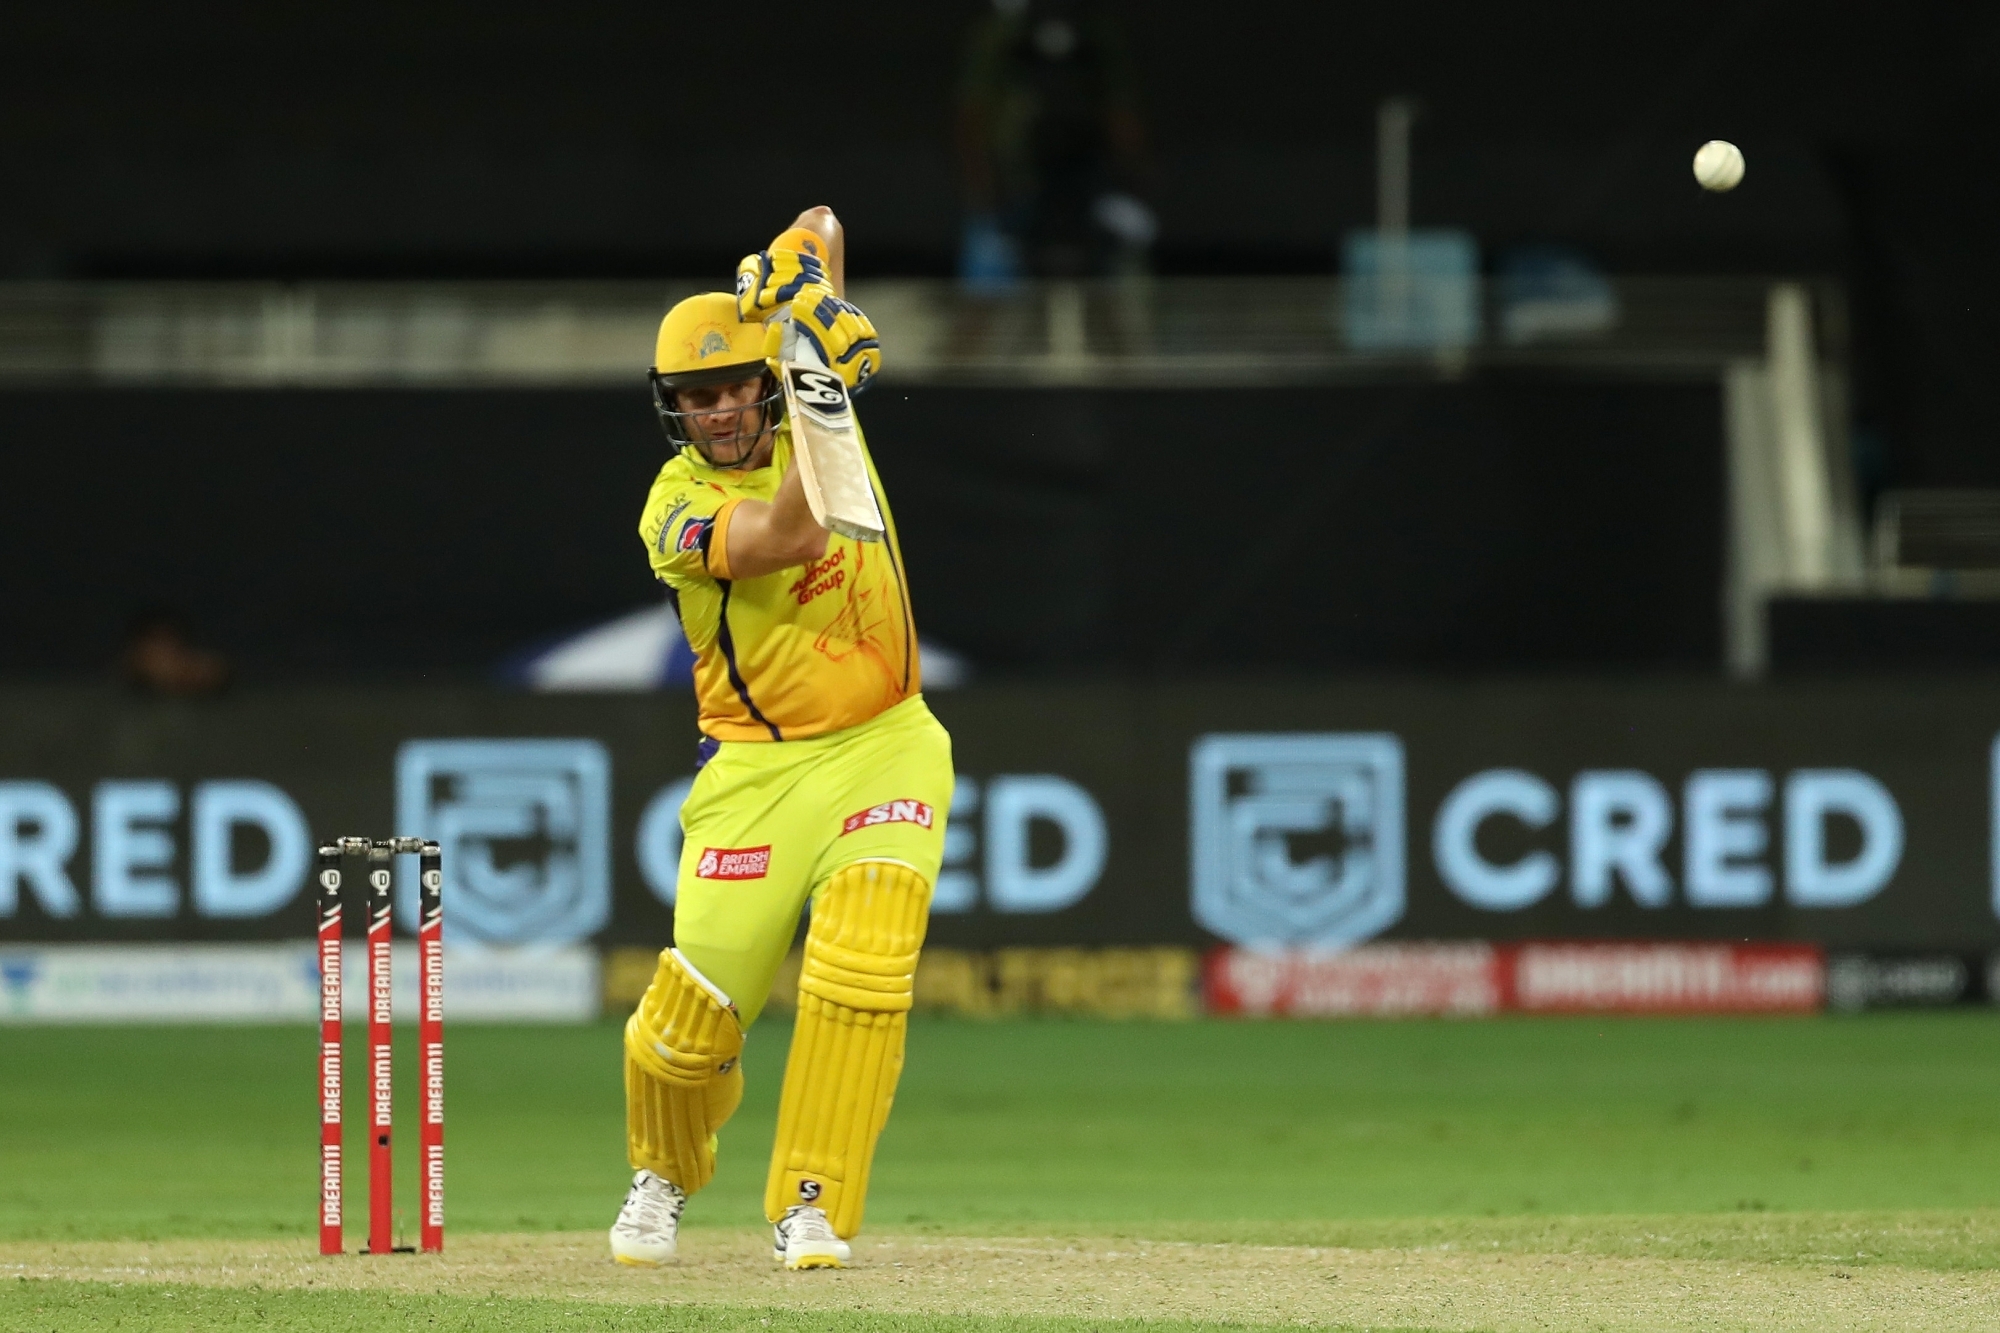 Shane Watson has scored fifties in each of his last two innings in this IPL. (Photo - IANS) 